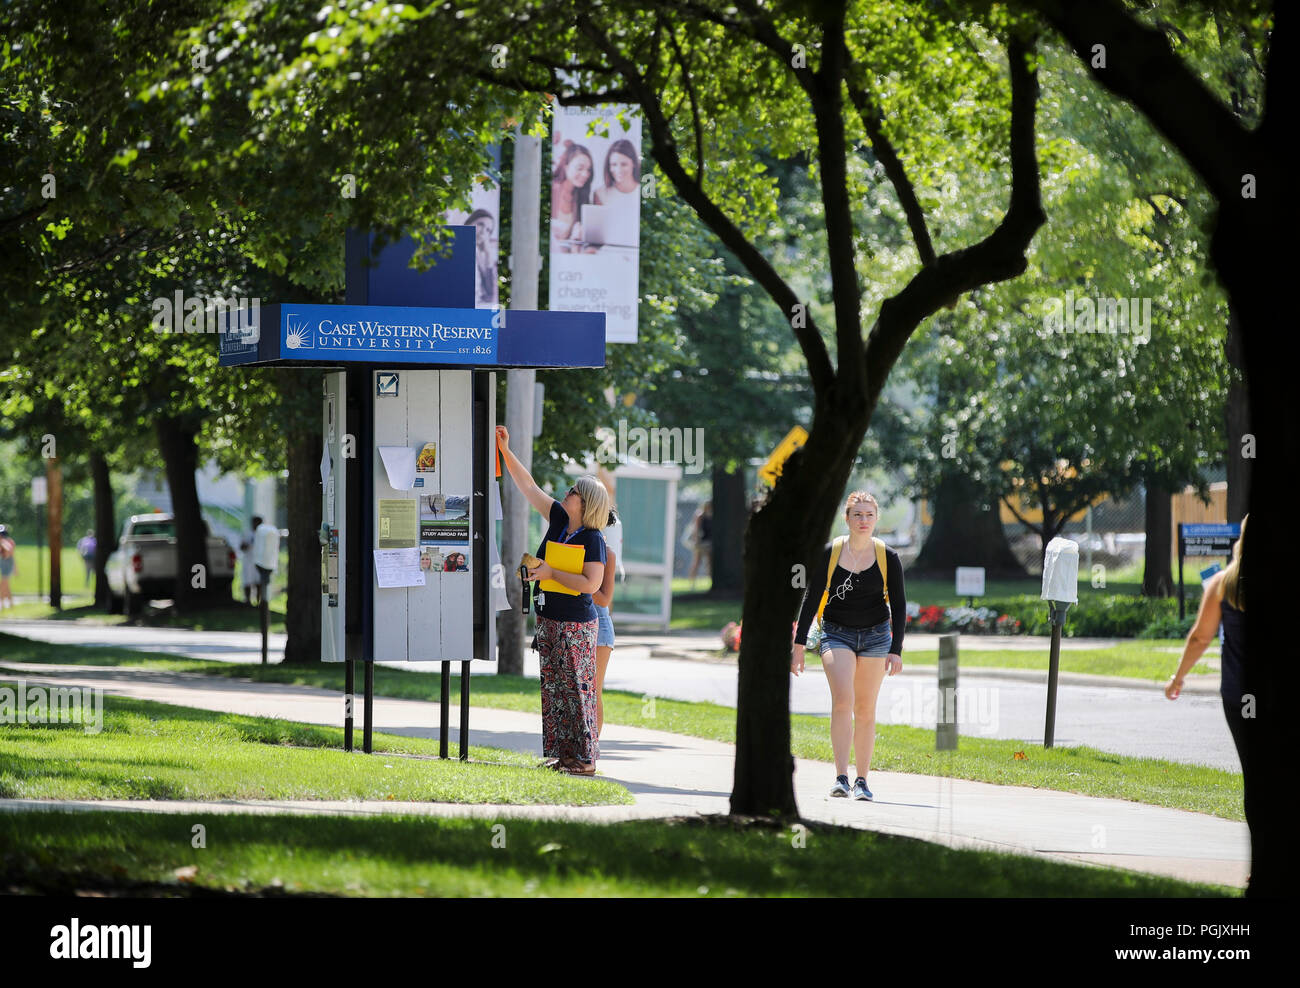 Ohio, USA. 23rd Aug, 2018. A woman posts information sheets on a koisk at Case Western Reserve University (CWRU) in Cleveland, Ohio, the United States, Aug. 23, 2018. It might not be as famous as the Ivy League schools, CWRU, located in Cleveland, the U.S. midwestern state of Ohio, is among the top American universities that Chinese students choose to study in. TO GO WITH Feature: Midwest U.S. university aspires to attract more Chinese students Credit: Wang Ying/Xinhua/Alamy Live News Stock Photo